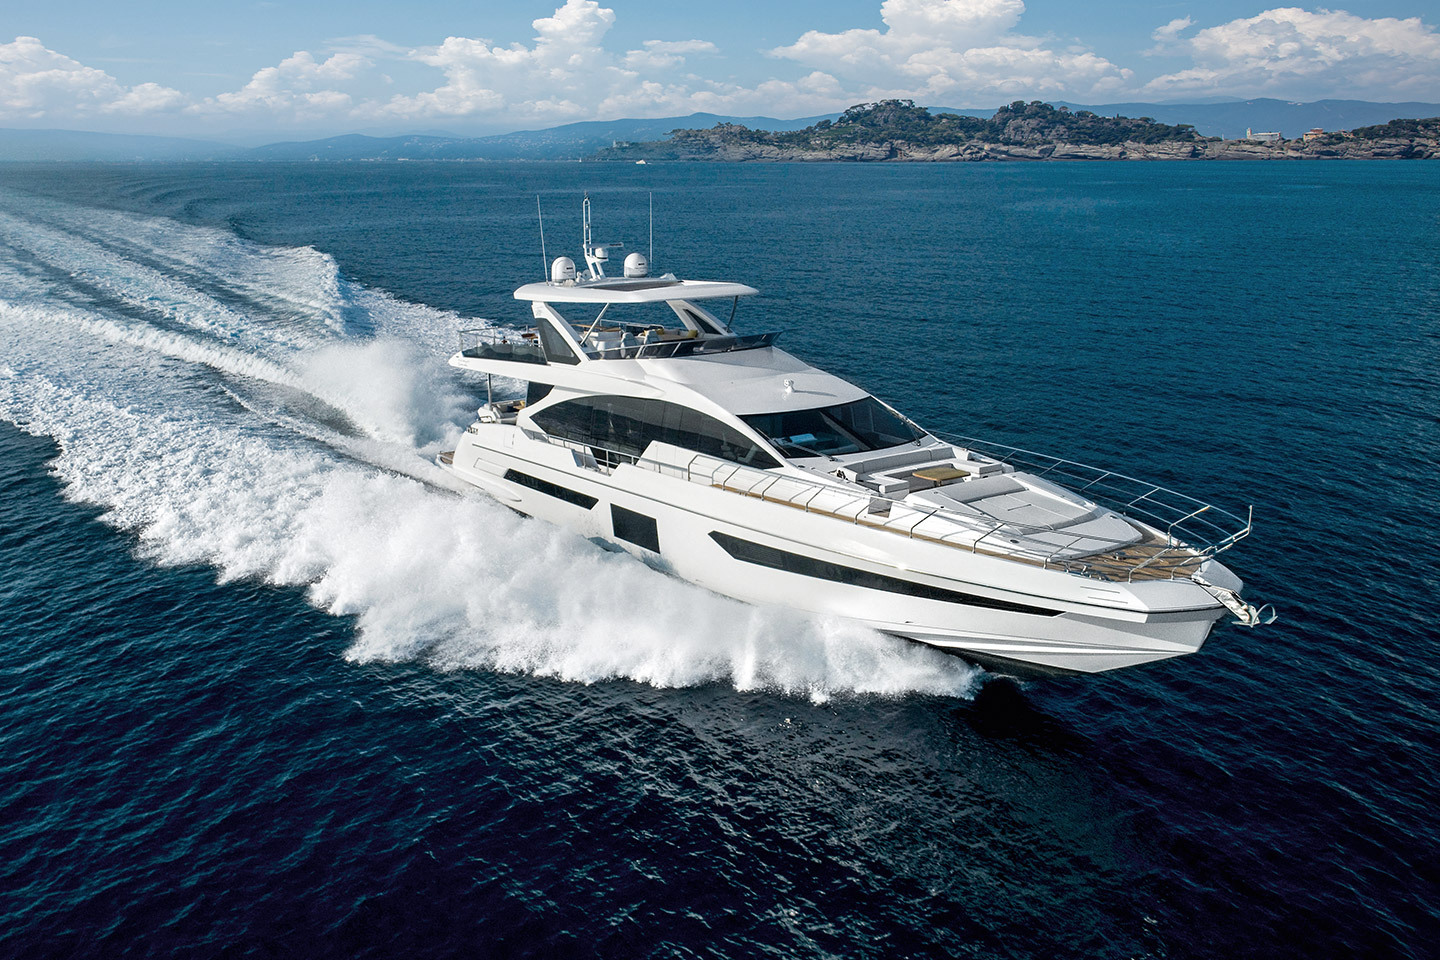 27M/87' m/y yacht KW for sale cruising on water